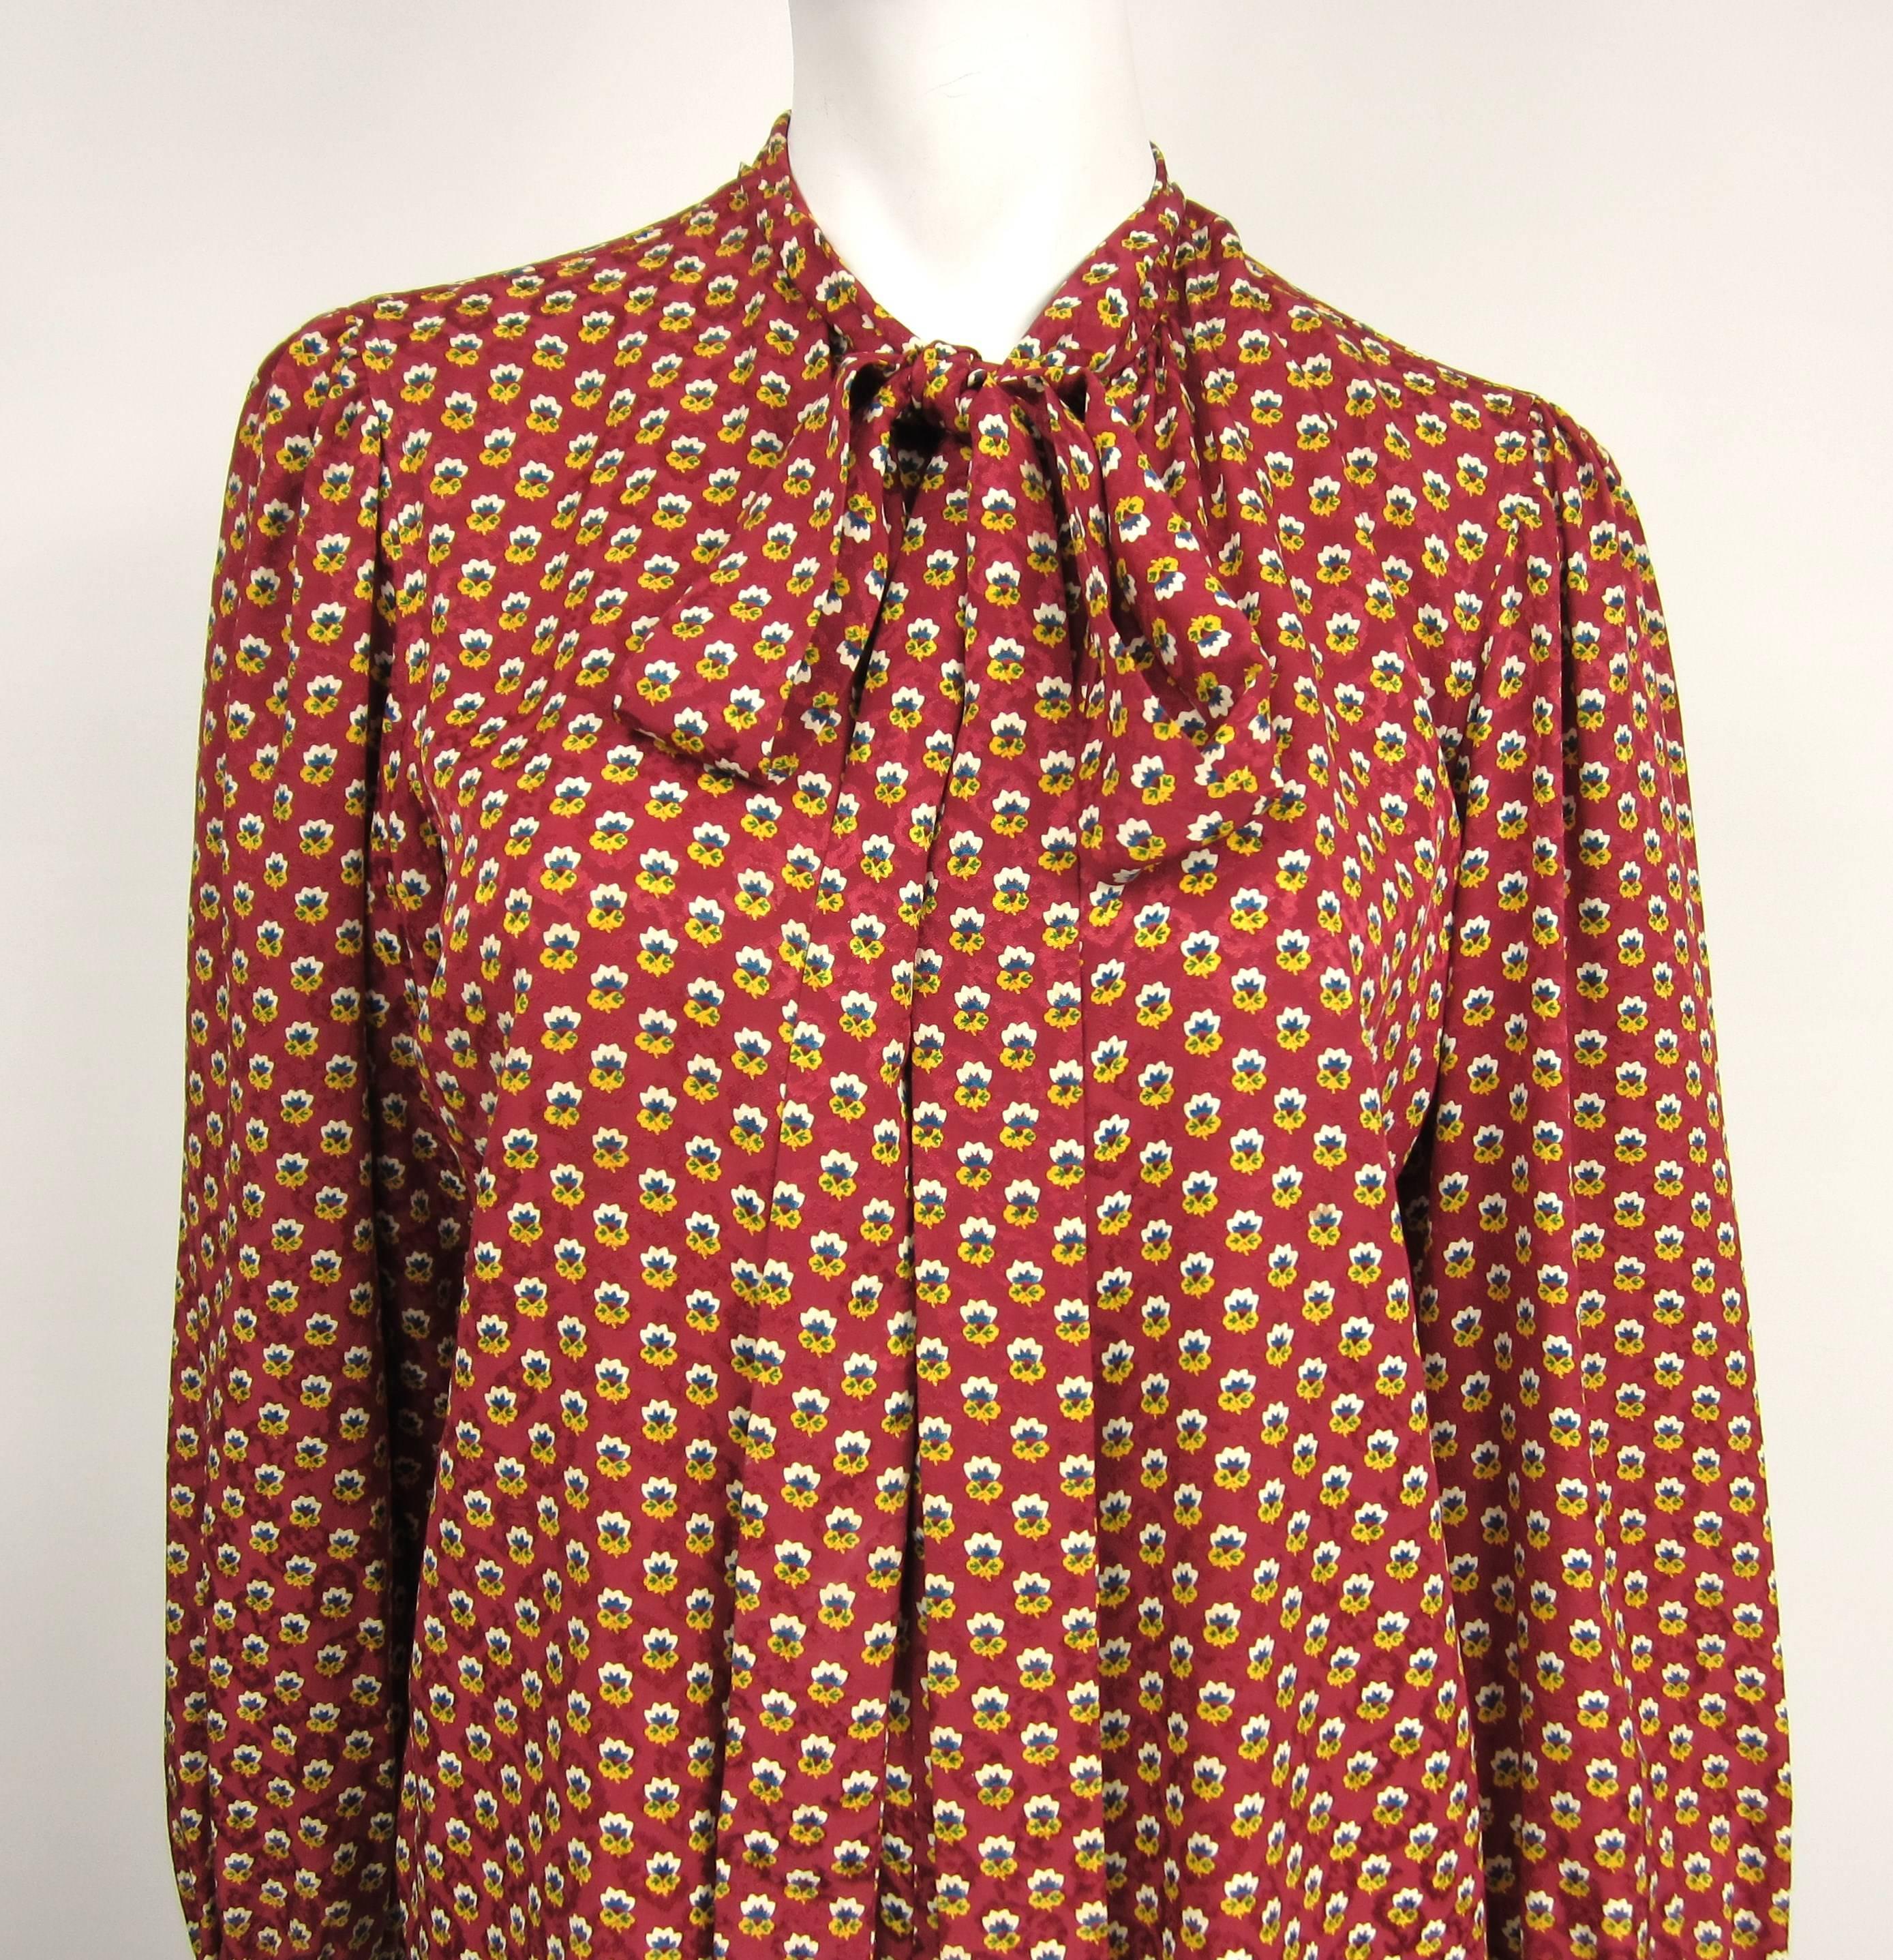 Vintage Late 1960s early 1970s Silk YSL Blouse Top with Hidden button placket. Long attached Scarf, timeless classic. Buttoned cuffs. Measuring Up to 38 in. chest -- Up to 38 in. waist - Sleeve 24 in. -- Collar 1.5-- Length down the front 23 in.